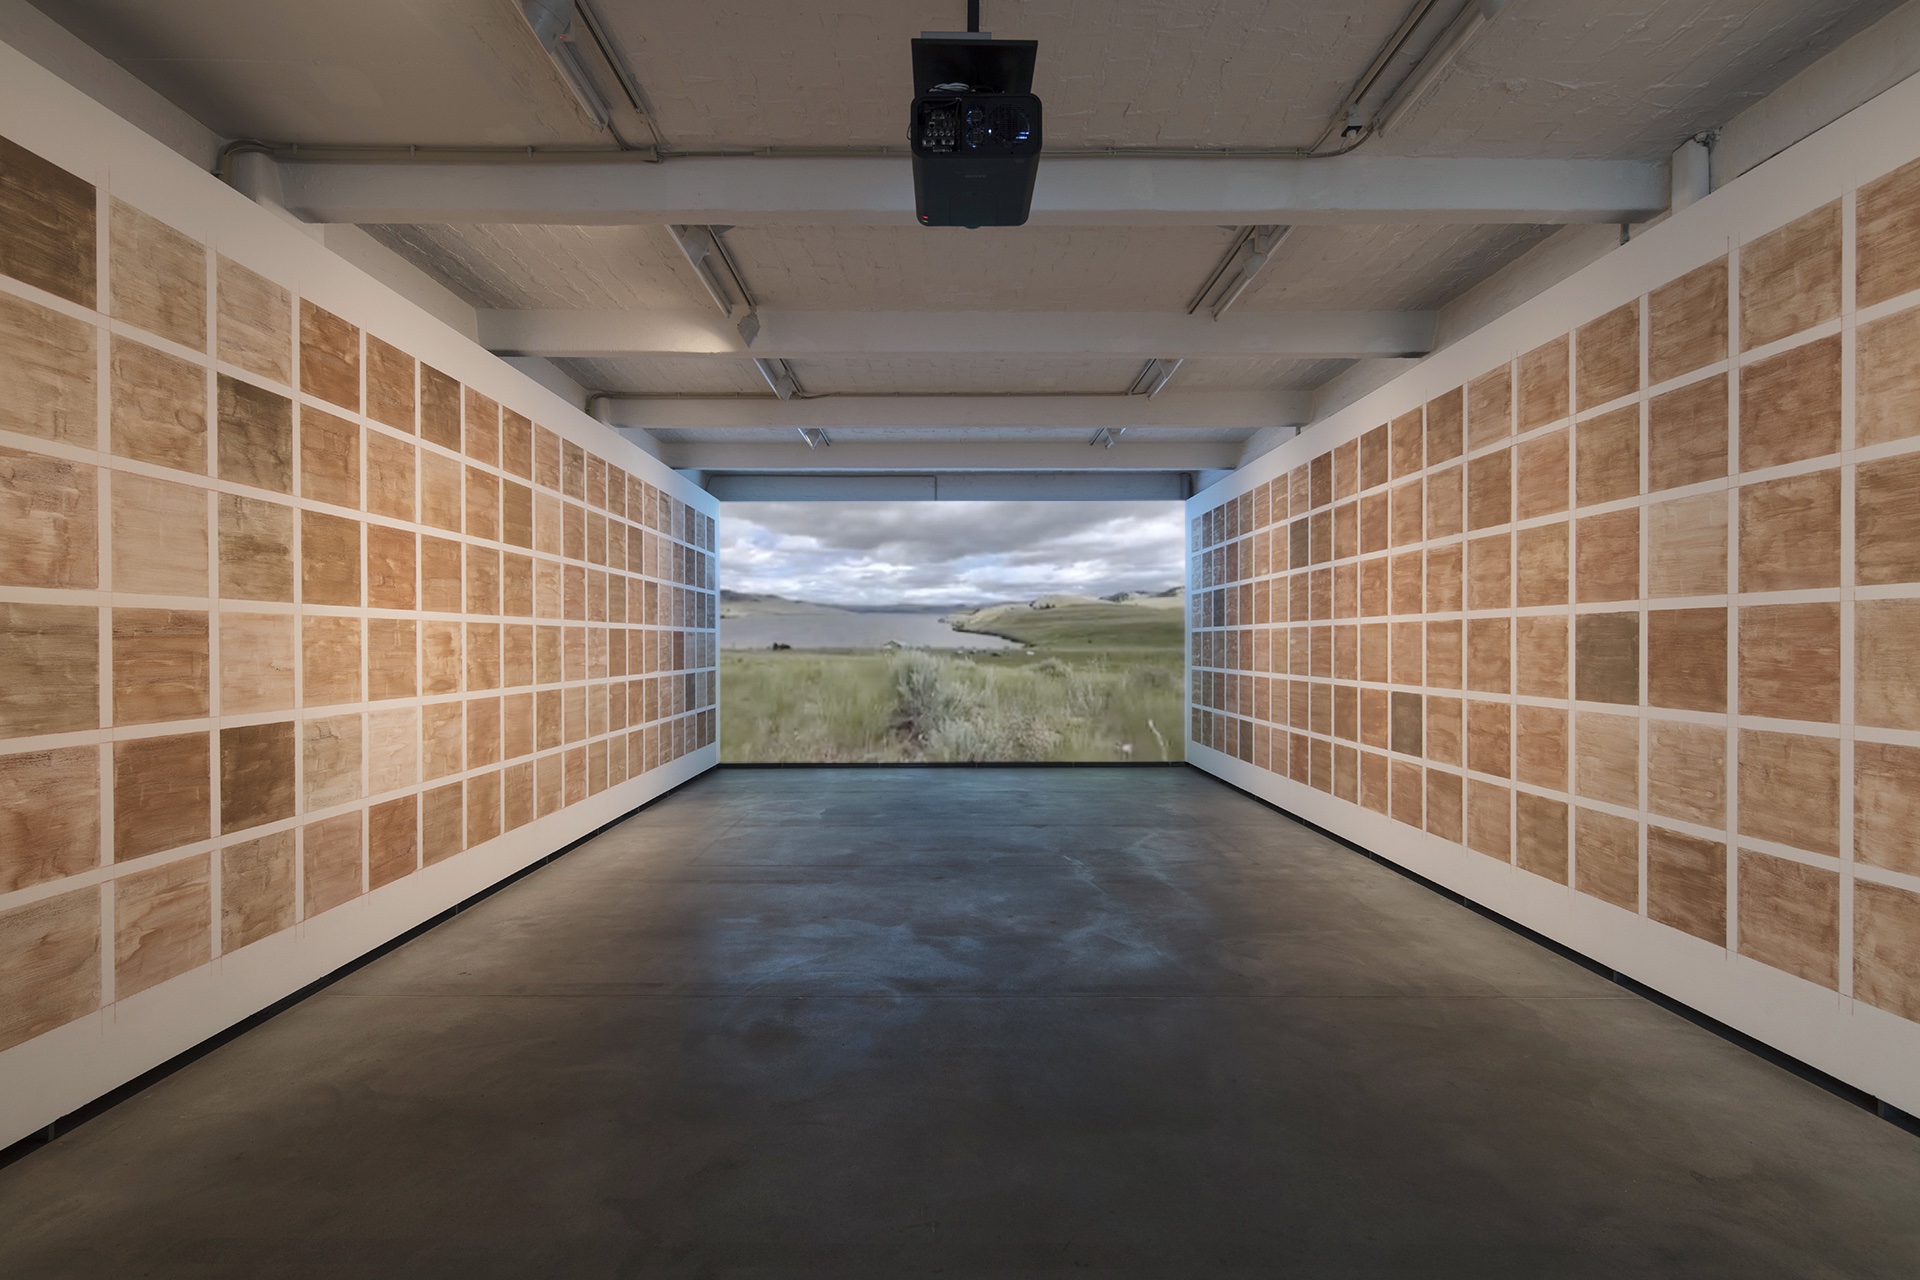 An image of a long gallery room with a projection on the far wall of a landscape with a lake surrounded by a meadow under a cloudy sky — a partial view of the Syilx (Okanagan) Nation’s territory; on the two side walls are grids of rectangles of different shades of brown